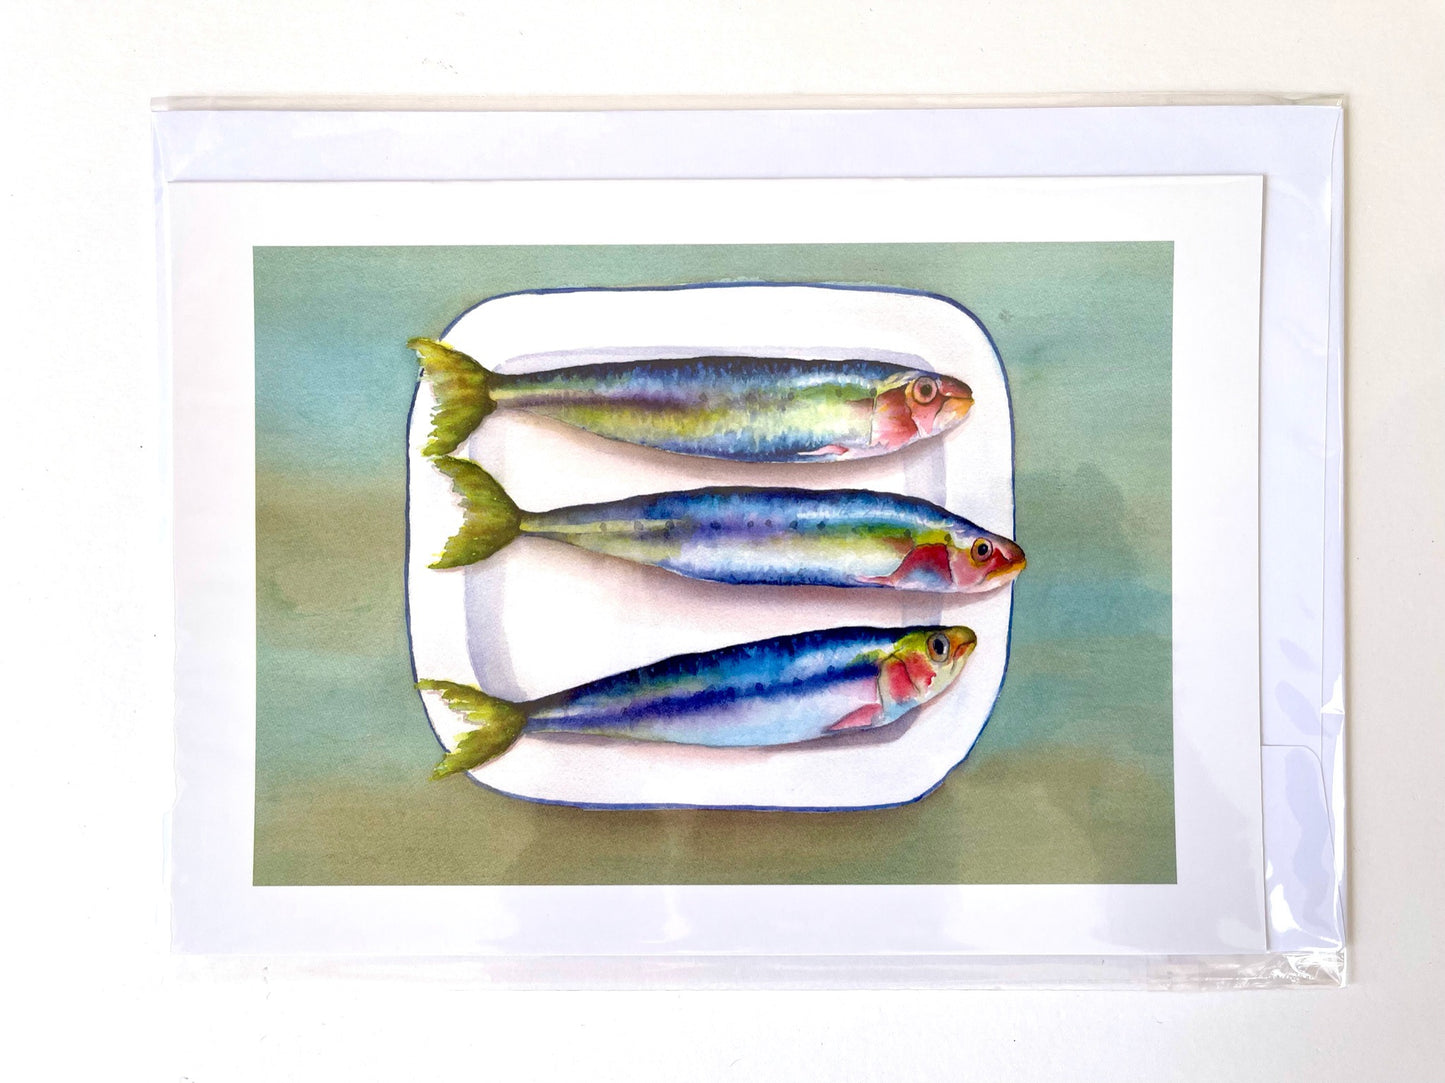 Sardines for Supper, A5 Greeting Card Blank inside.